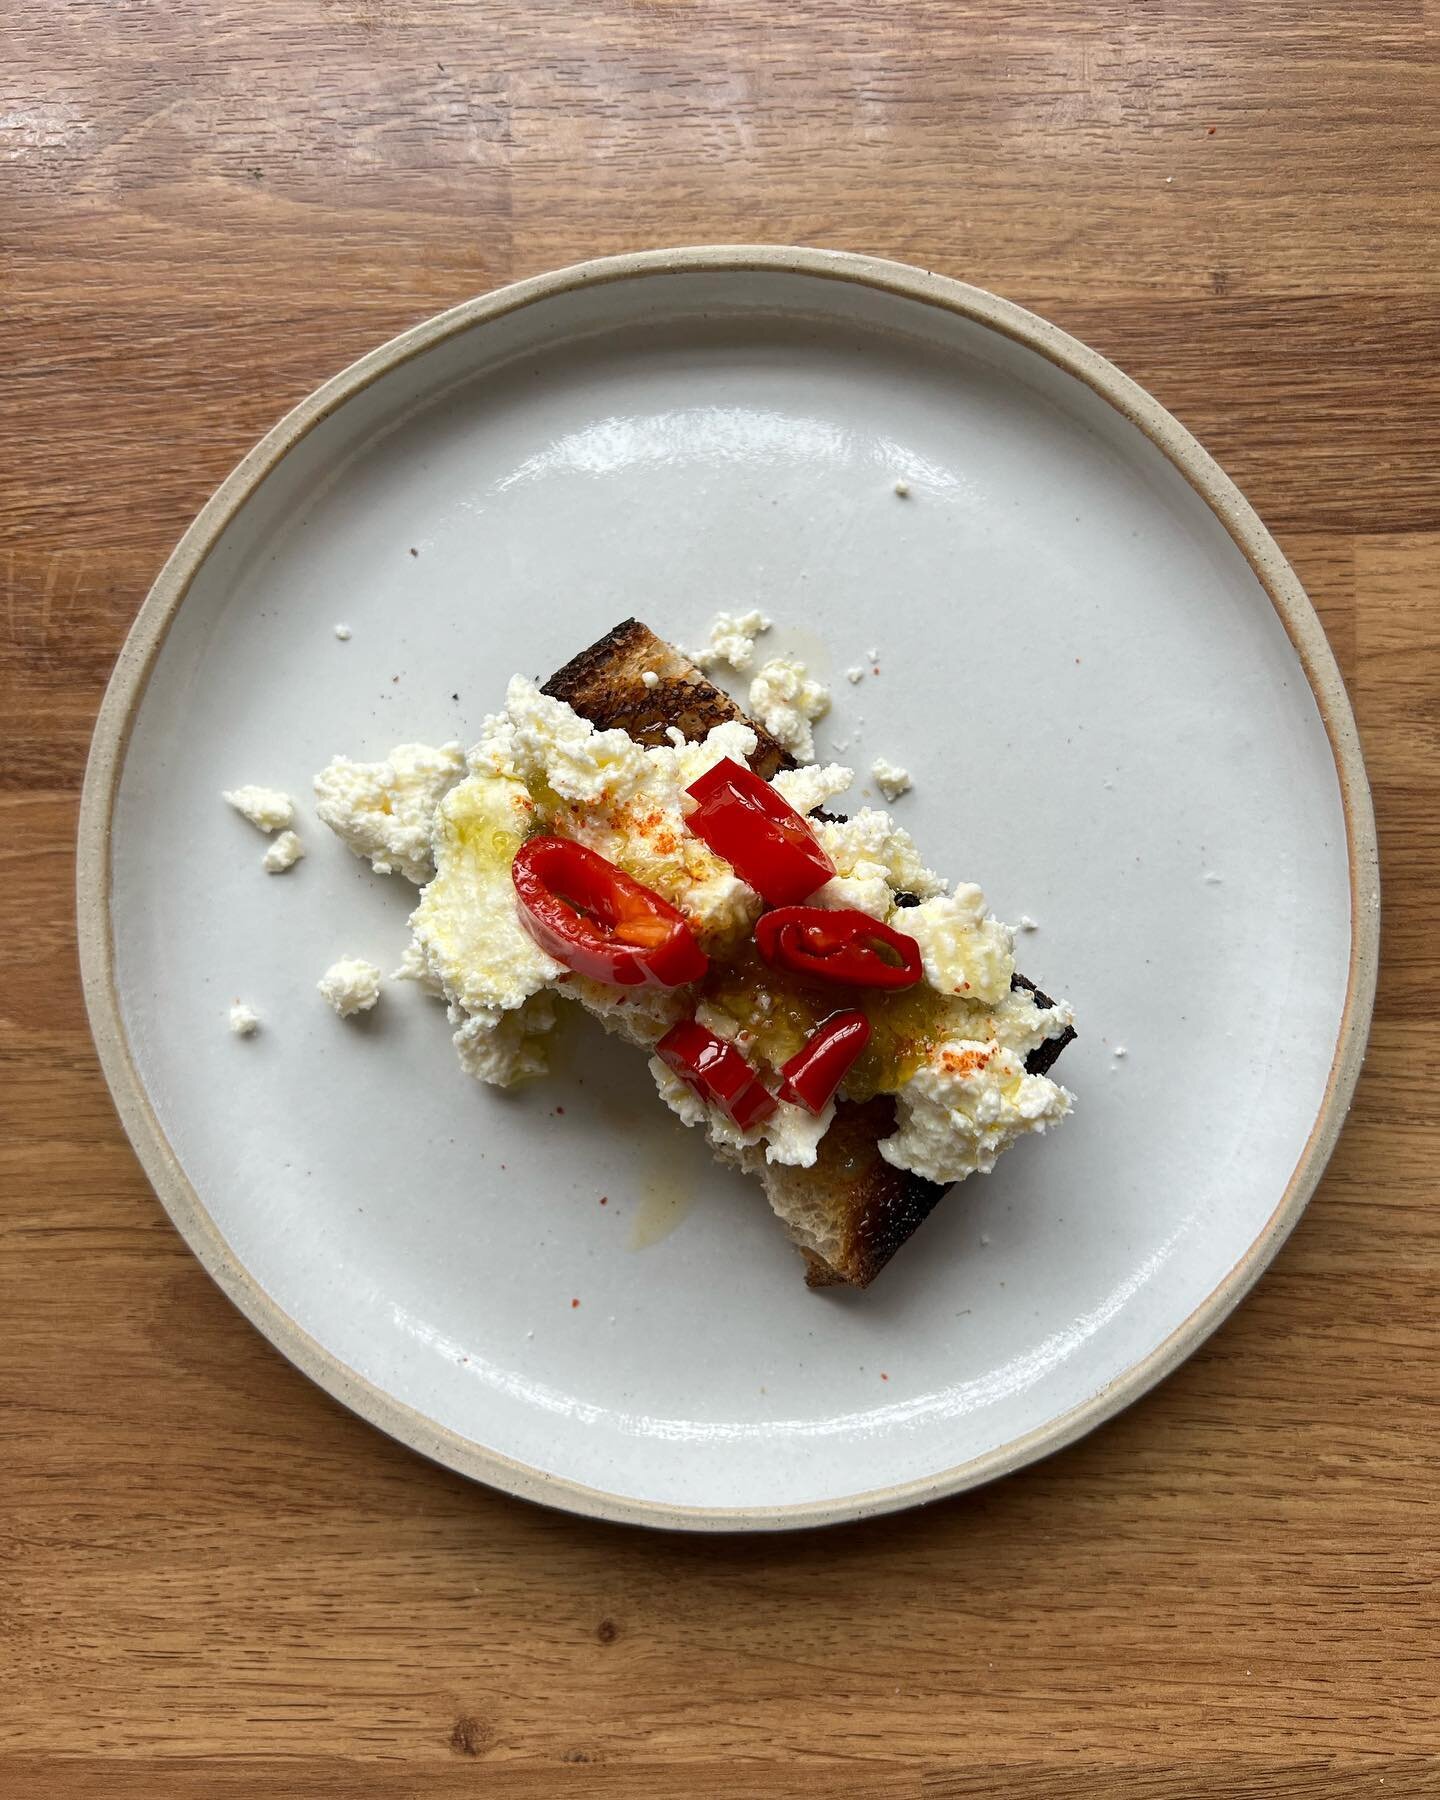 A little plate of homemade ricotta and pickled chillies on toast.. 

#ilovepickles #margate